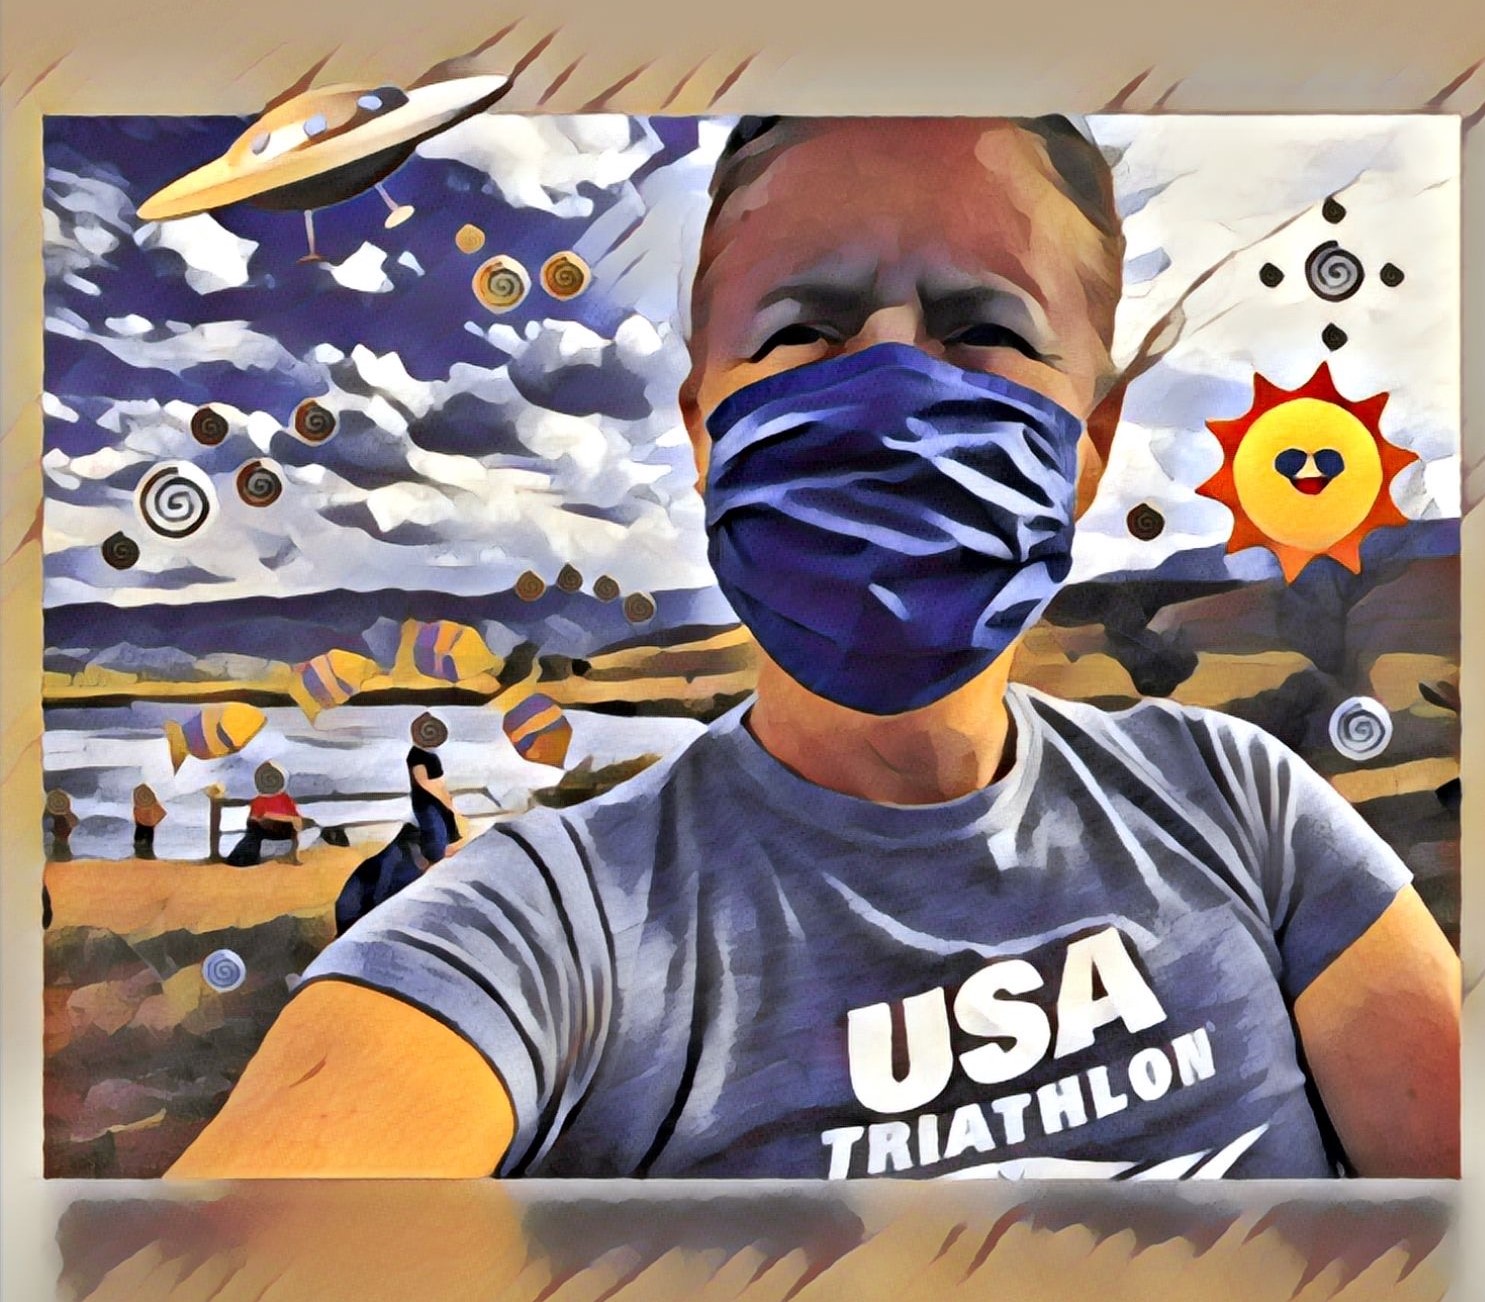 Artwork showing woman in cloth face mask and sporting a triathlon t-shirt, standing in front of a lake with mountains in the background. Image accompanies a story about regaining triathlon fitness after sexual assault.